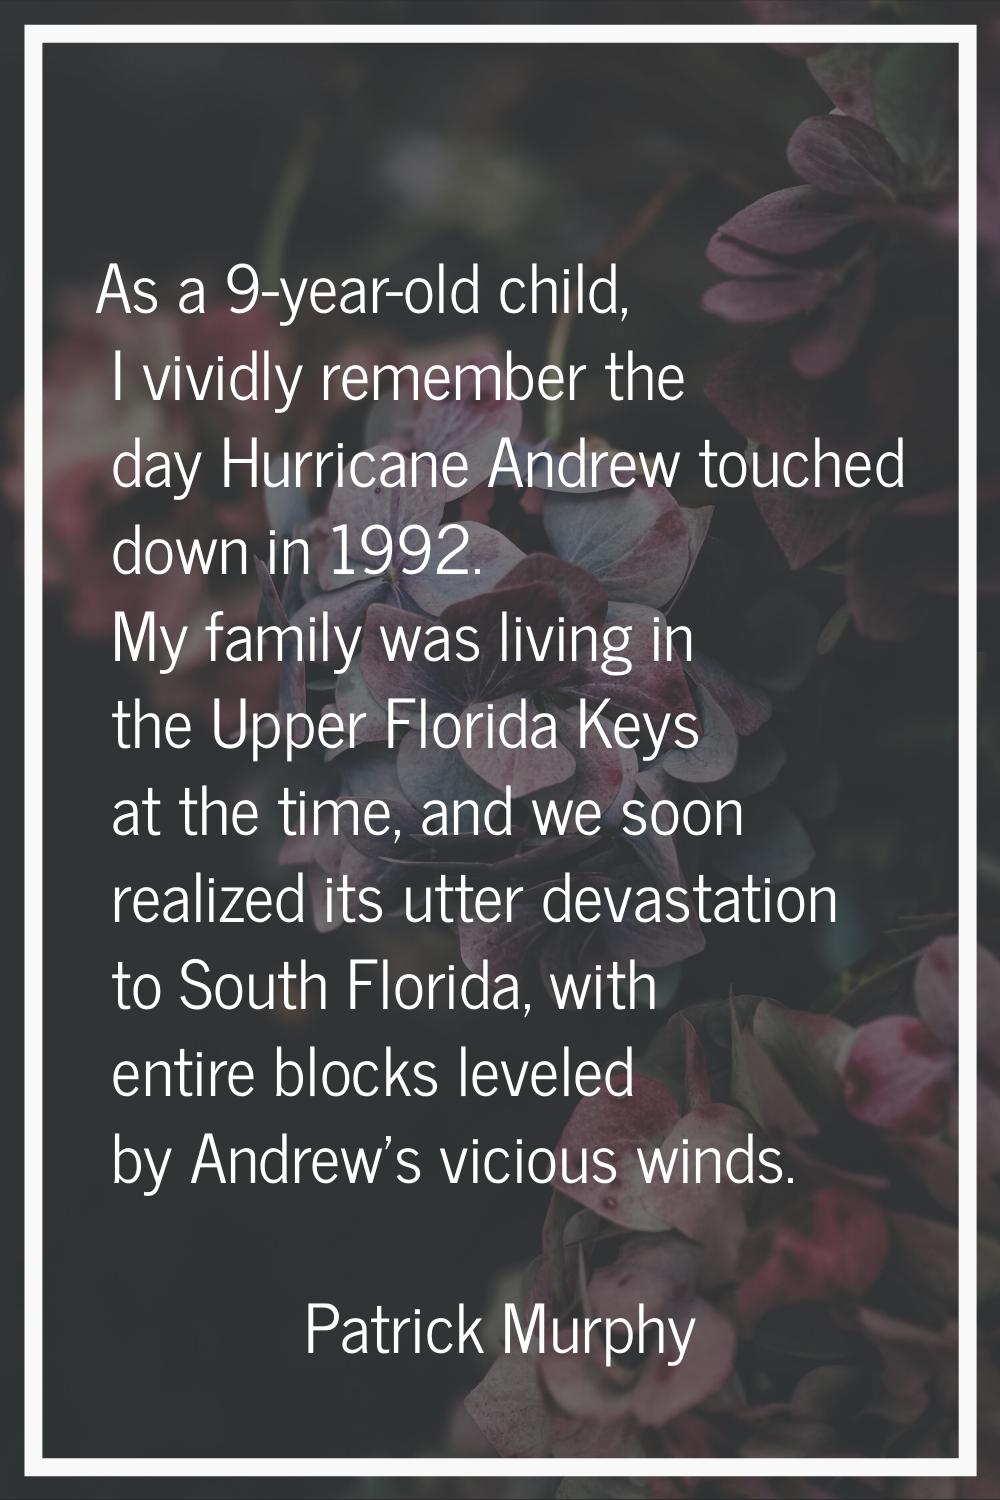 As a 9-year-old child, I vividly remember the day Hurricane Andrew touched down in 1992. My family 